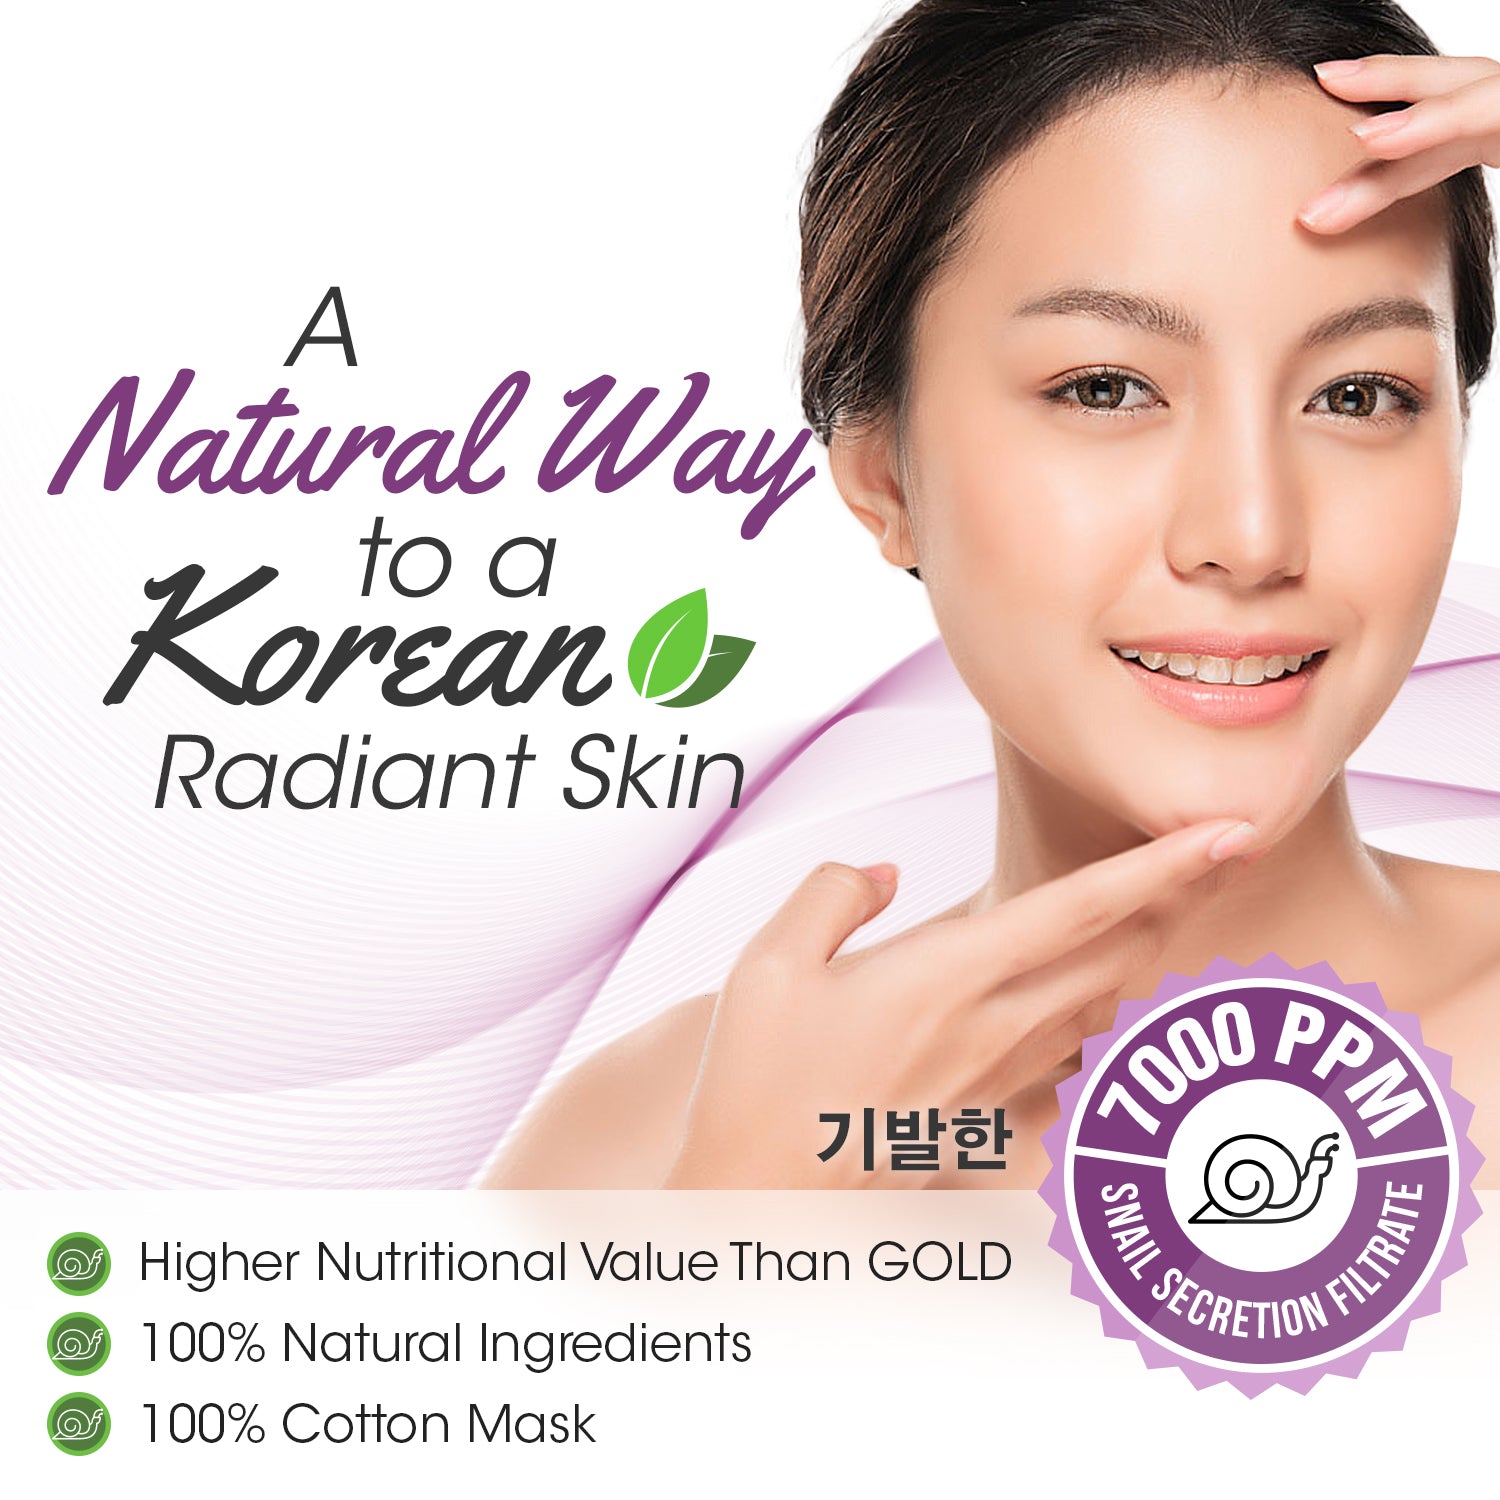 A natural way to a Korean radiant skin